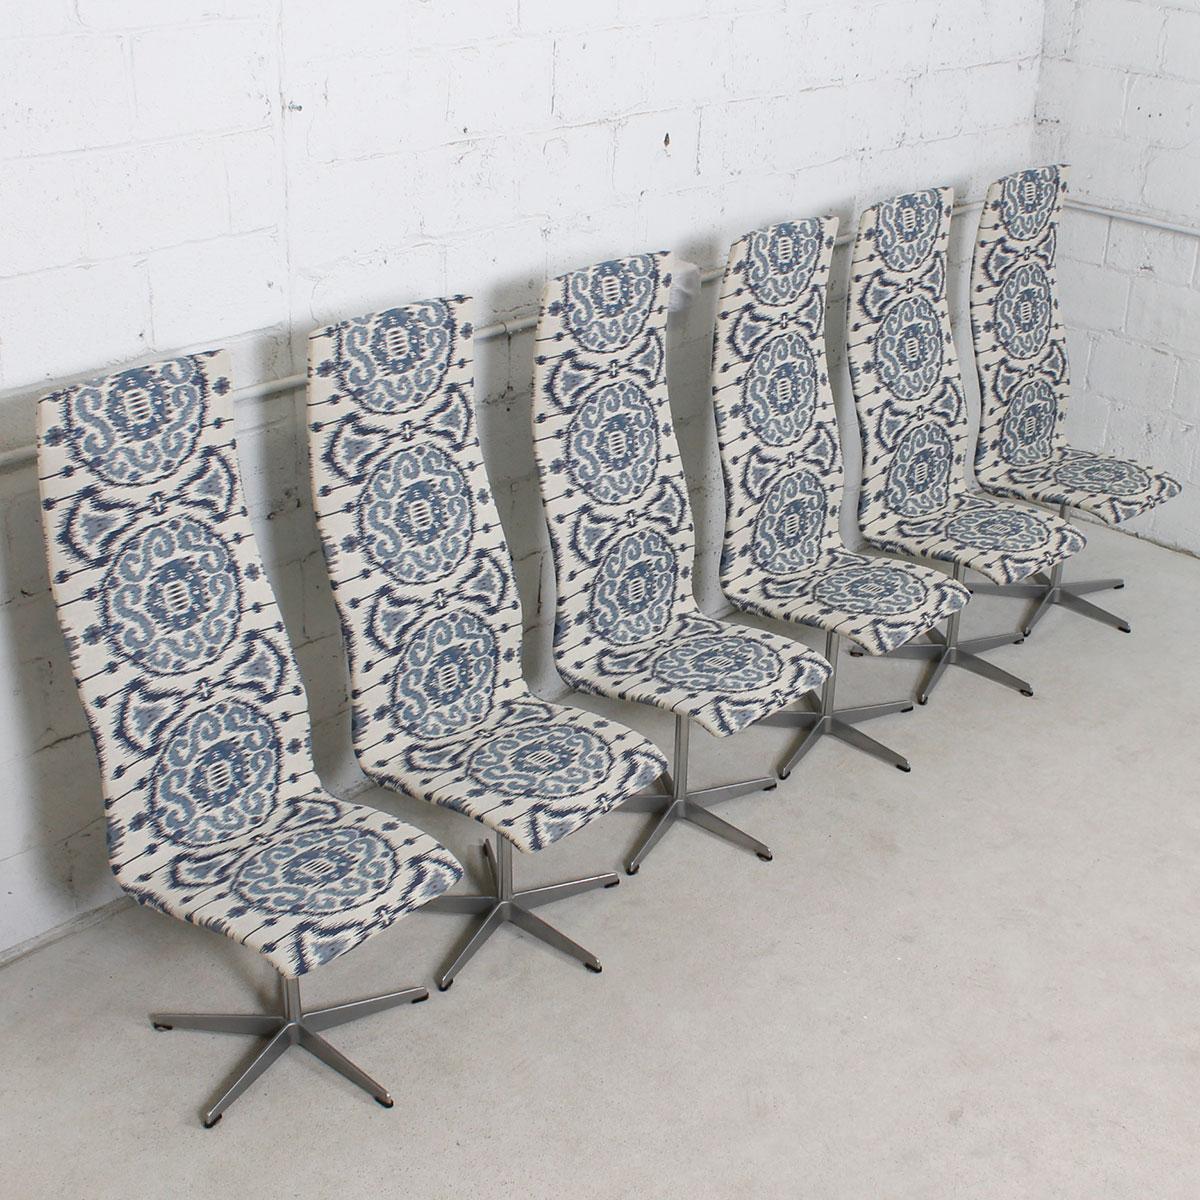 Mid-Century Modern Set of 6 Vintage Fritz Hansen Oxford Chairs in New Blue & White Ikat Upholstery For Sale